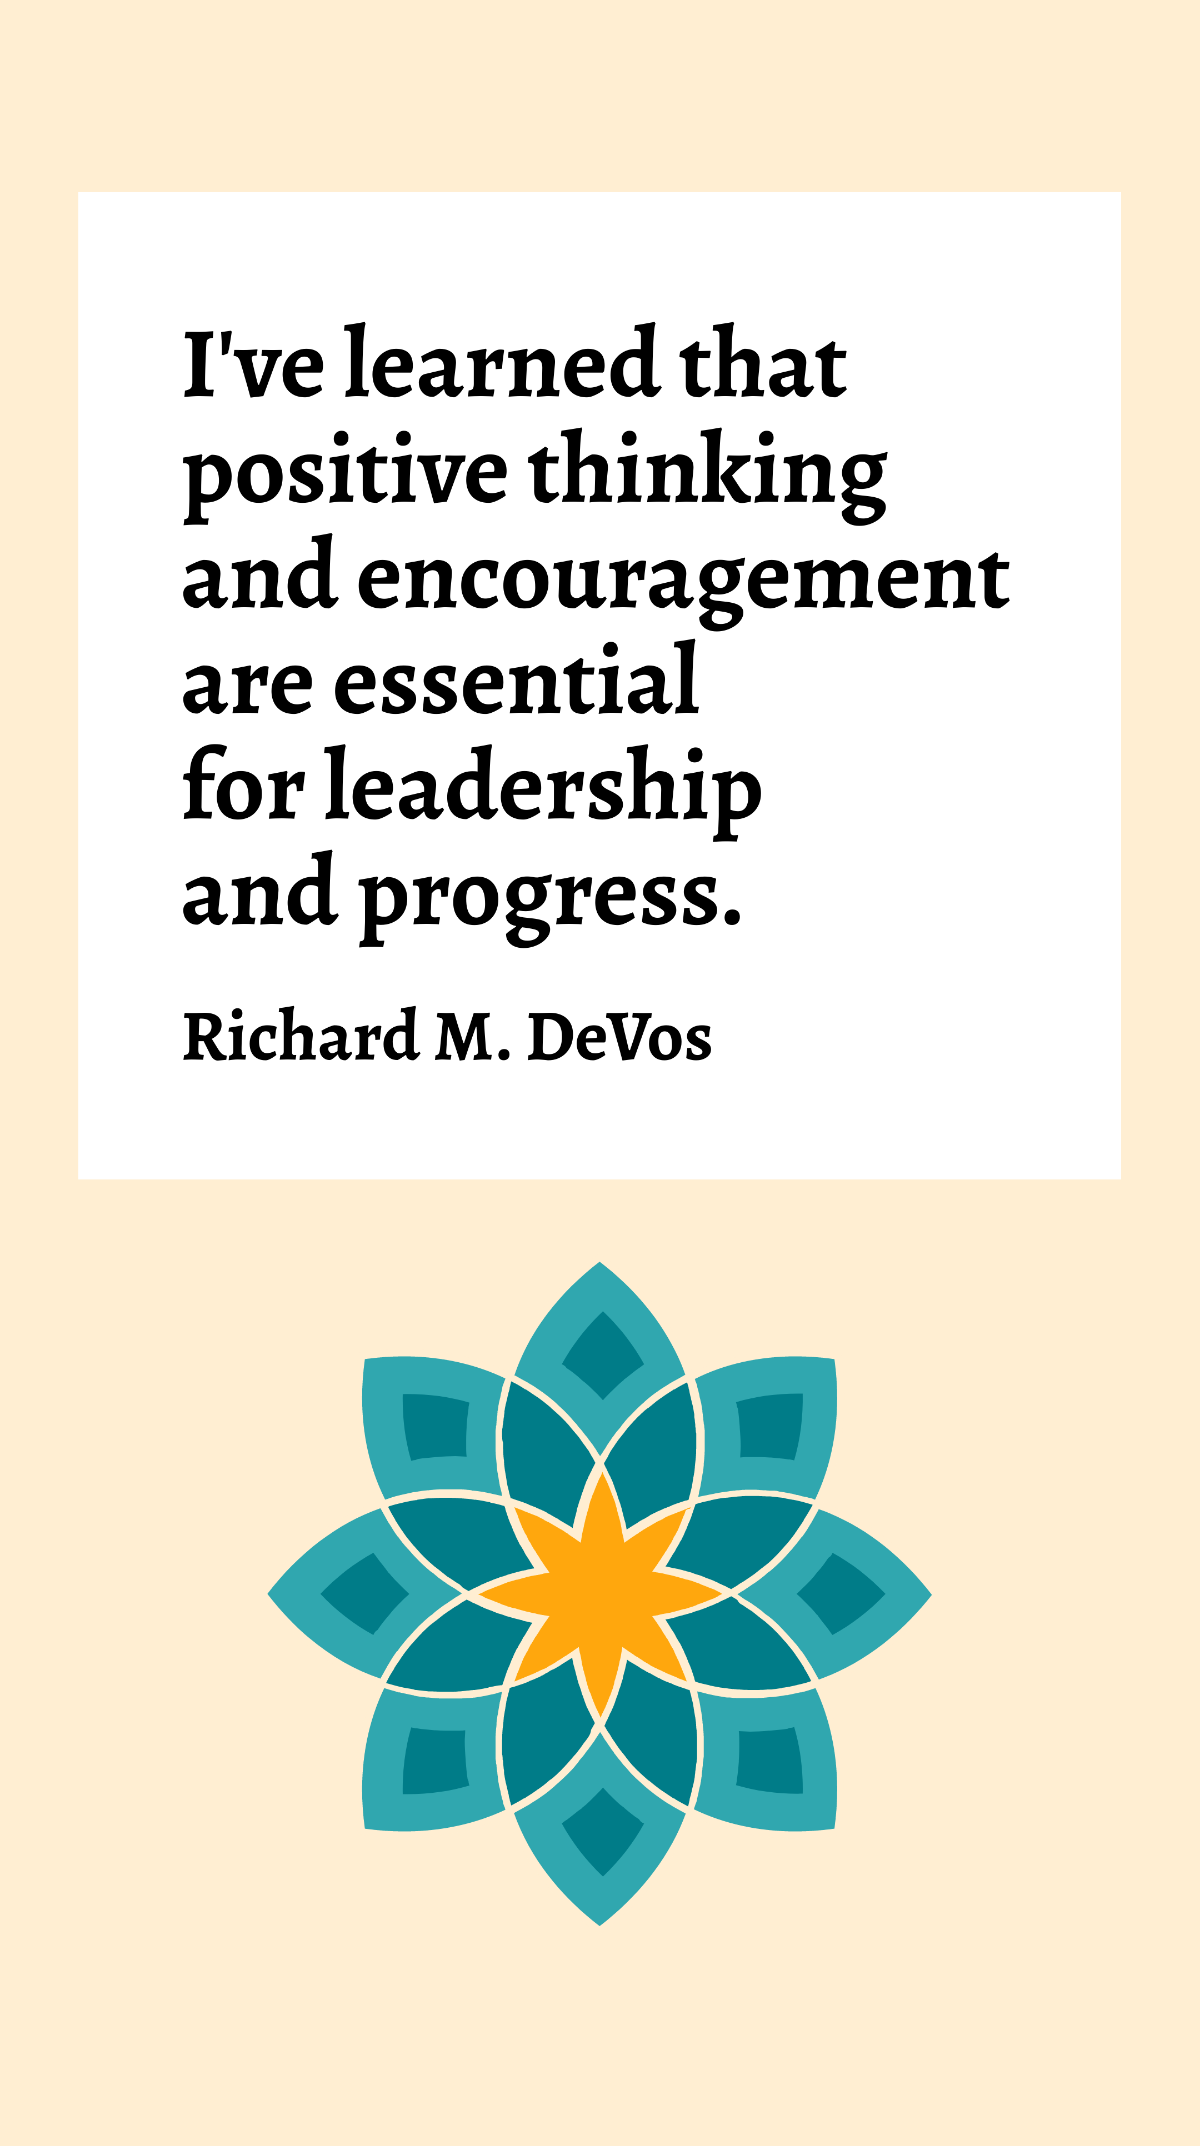 Richard M. DeVos - I've learned that positive thinking and encouragement are essential for leadership and progress. Template